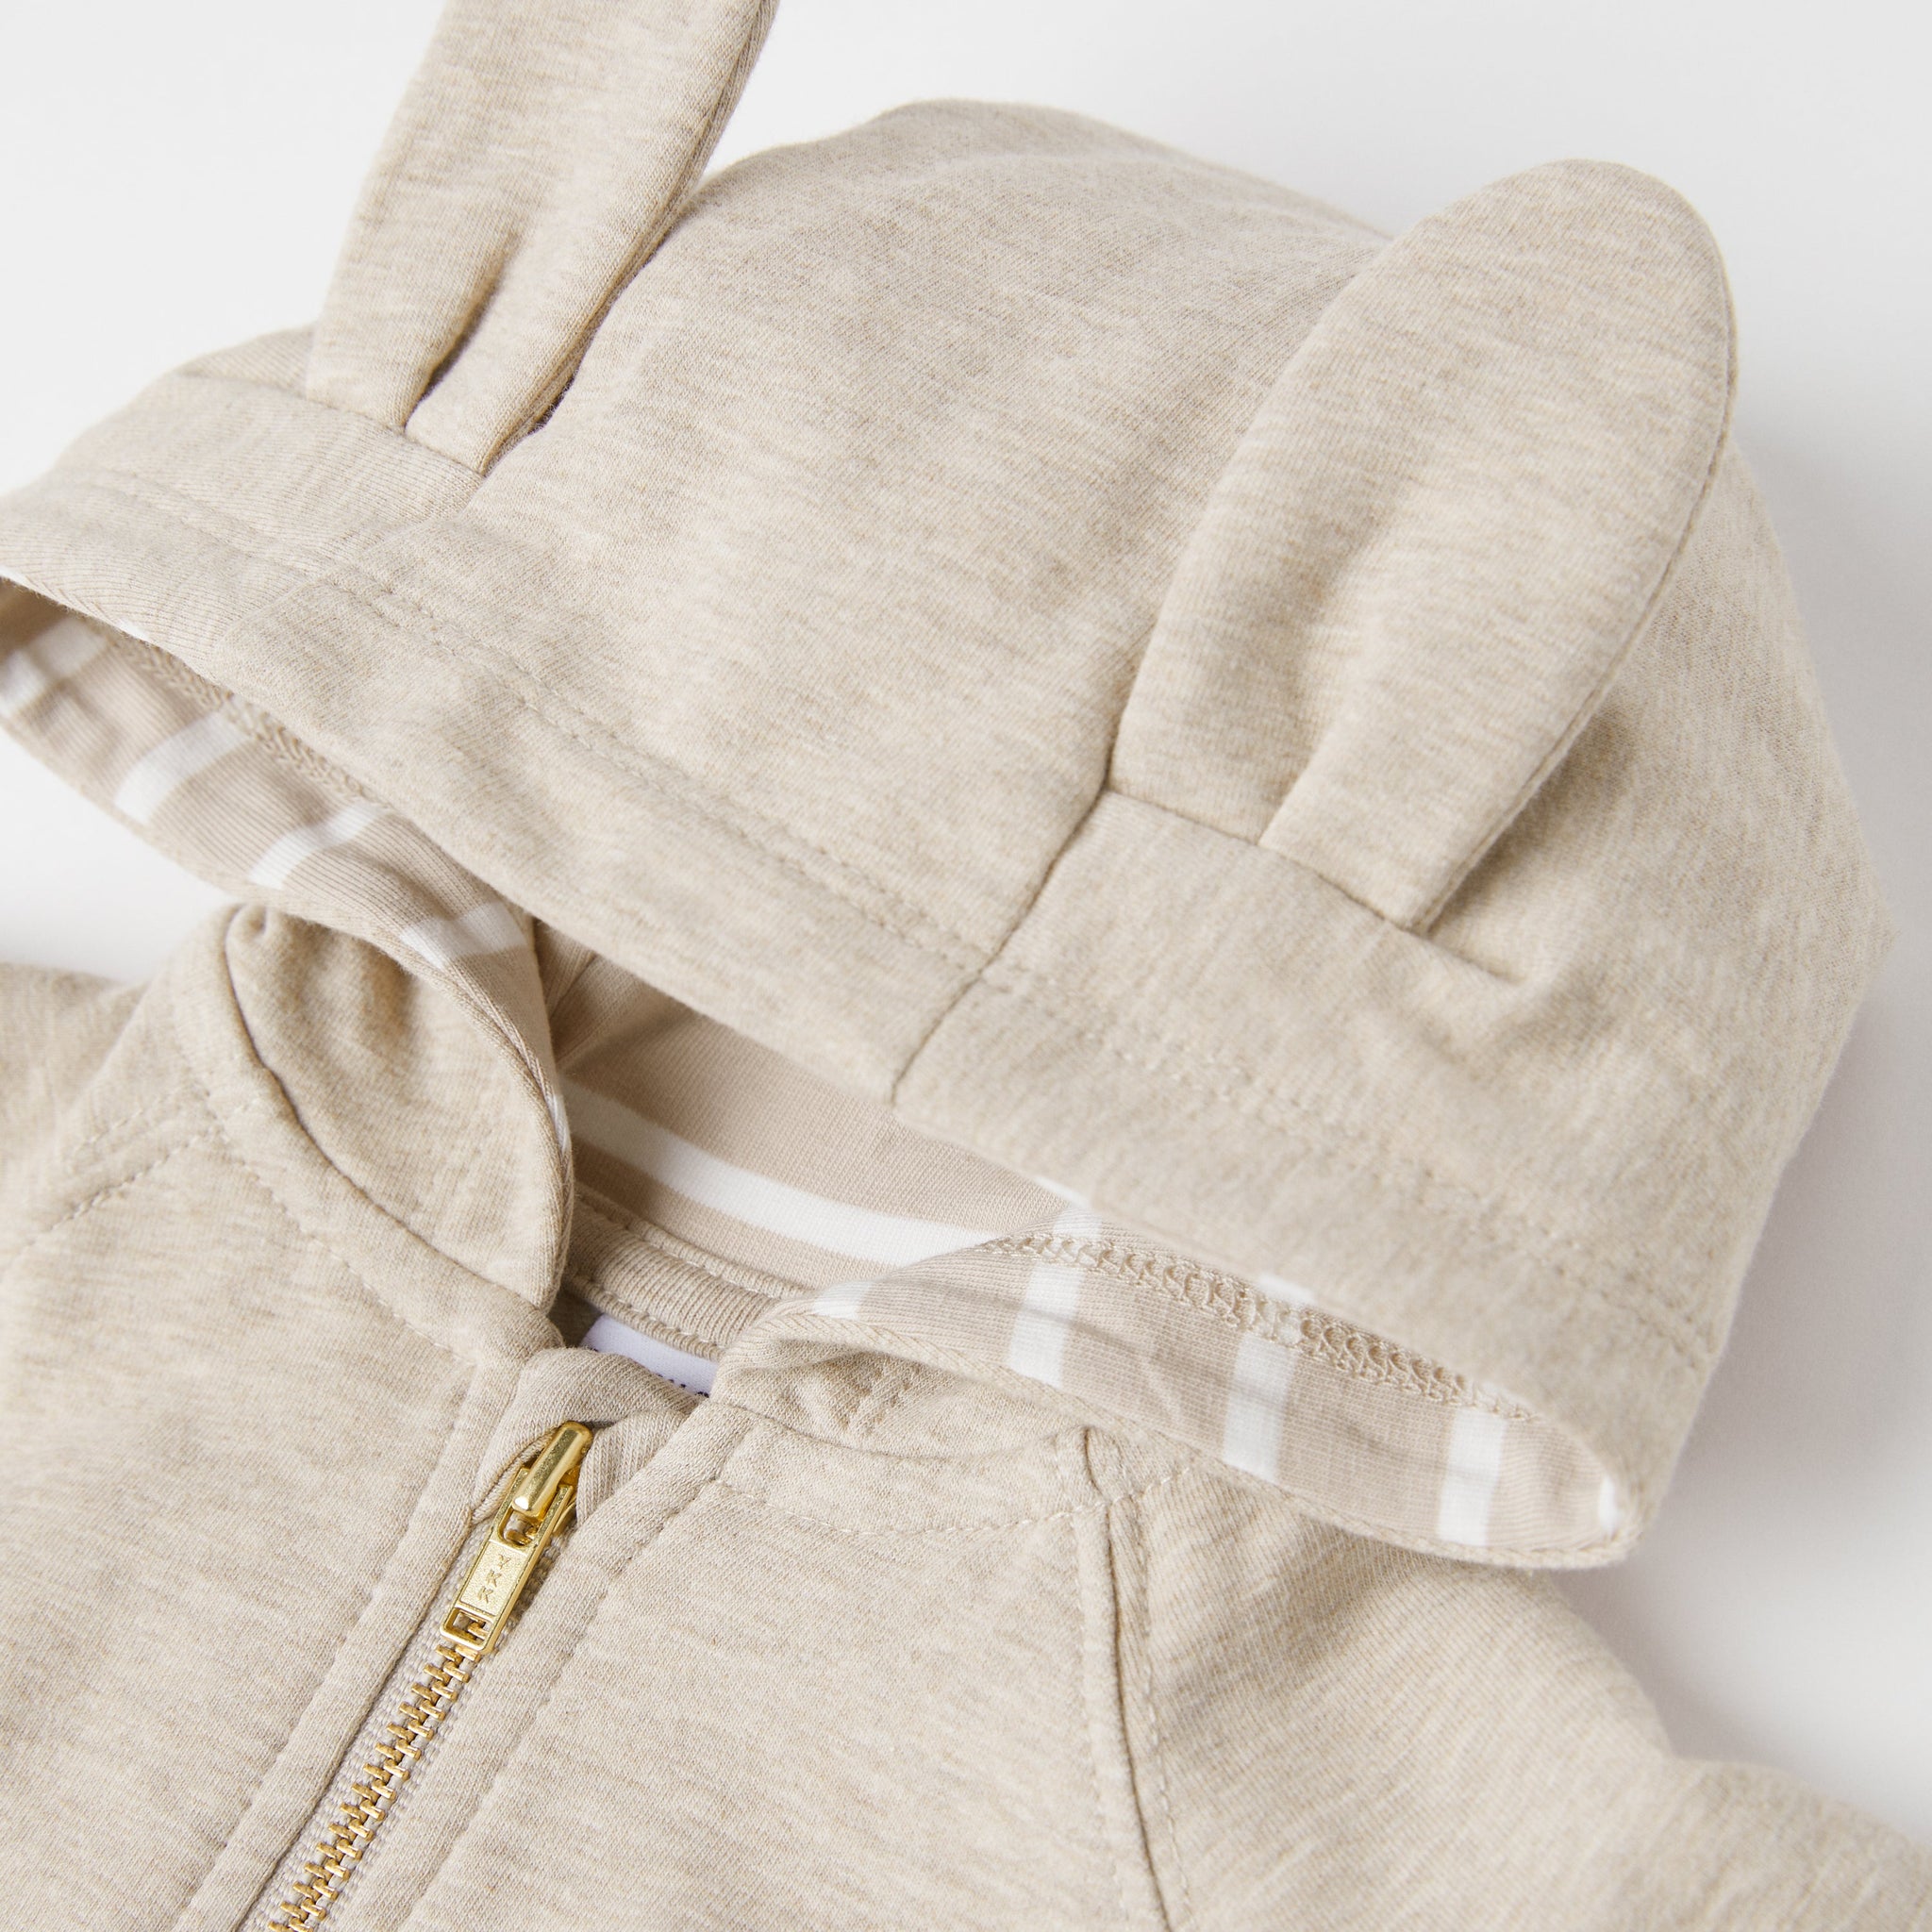 Organic Cotton Beige Baby Hoodie from the Polarn O. Pyret Kidswear collection. Nordic kids clothes made from sustainable sources.